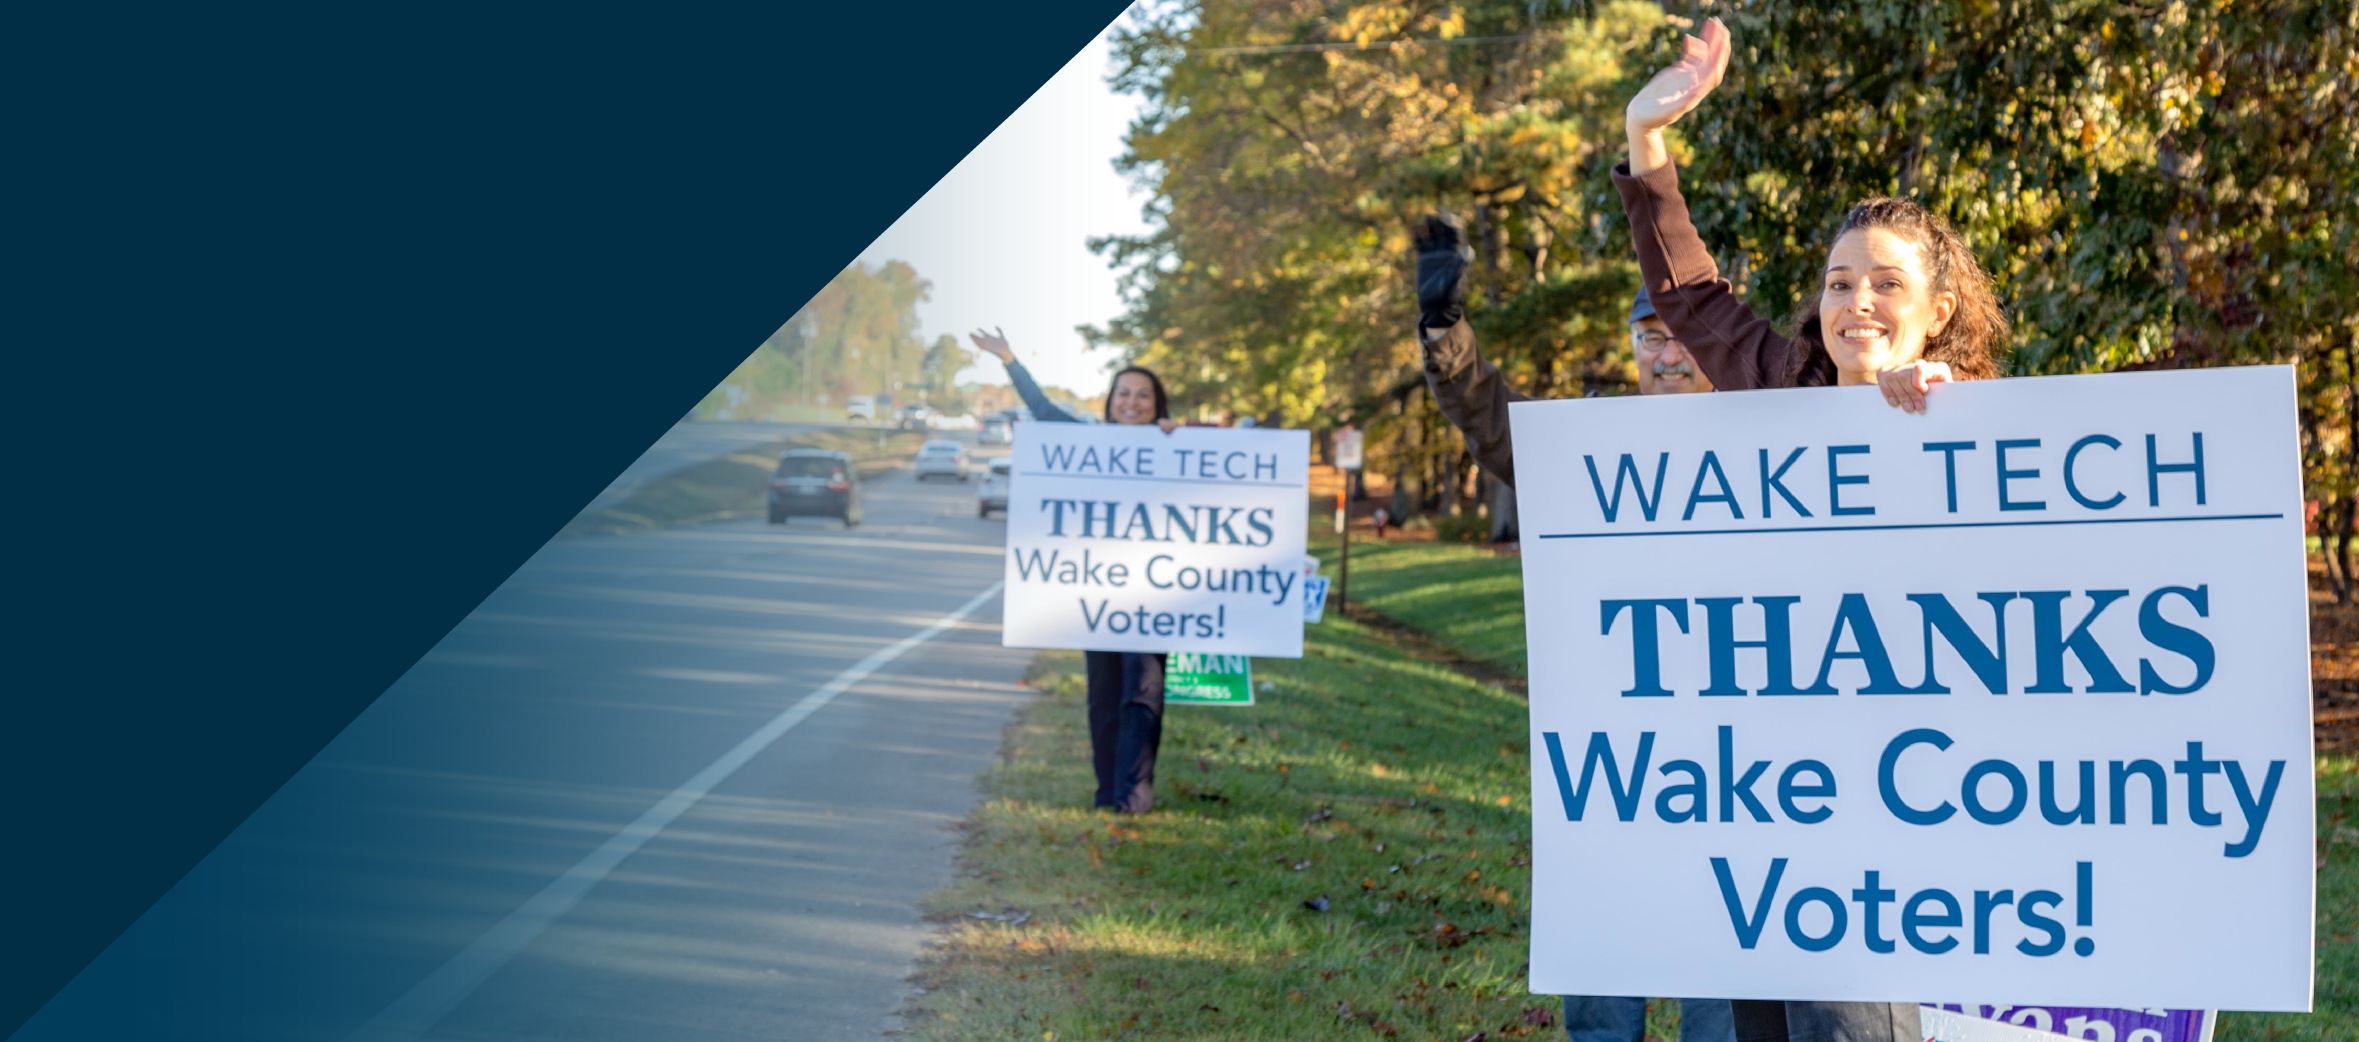 Read More: Wake Tech Thanks Wake County Voters for Generous Show of Support